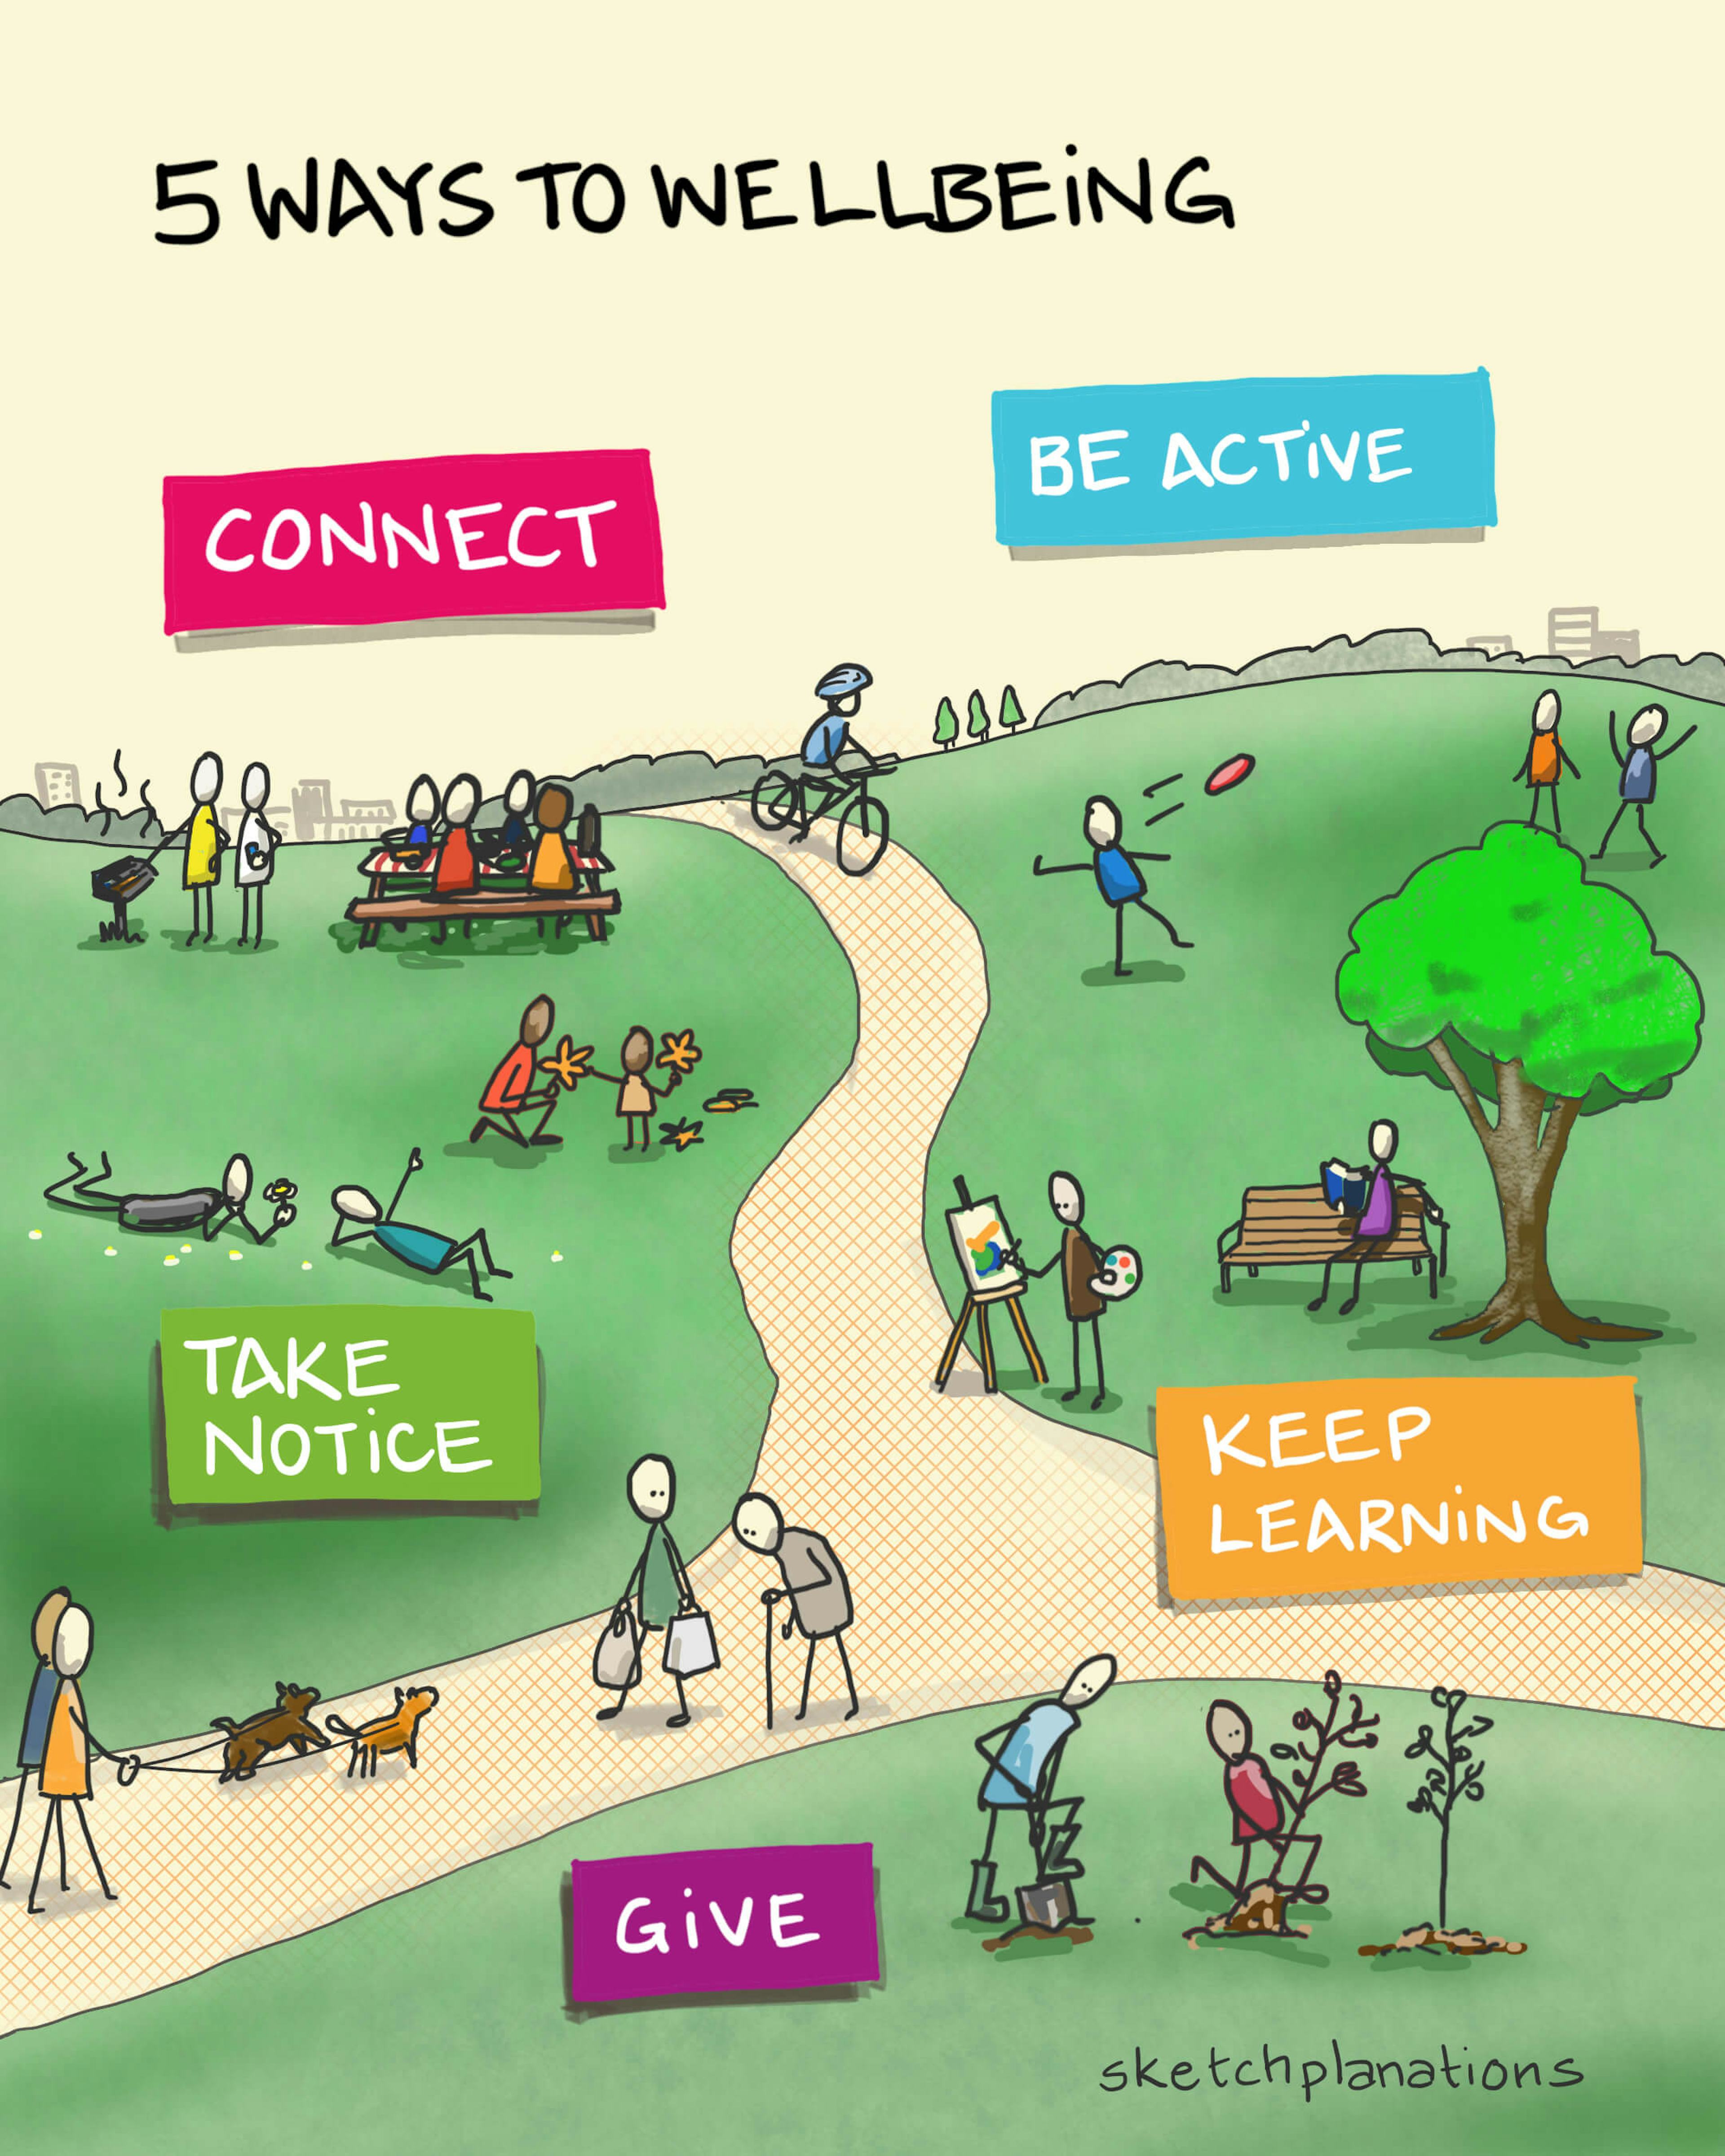 5 Ways to Wellbeing Illustration: in a busy park scene the 5 ways to wellbeing are depicted as families and friends come together to socialise and interact with their surroundings to Connect, Be Active, Take Notice, Keep Learning and Give. 